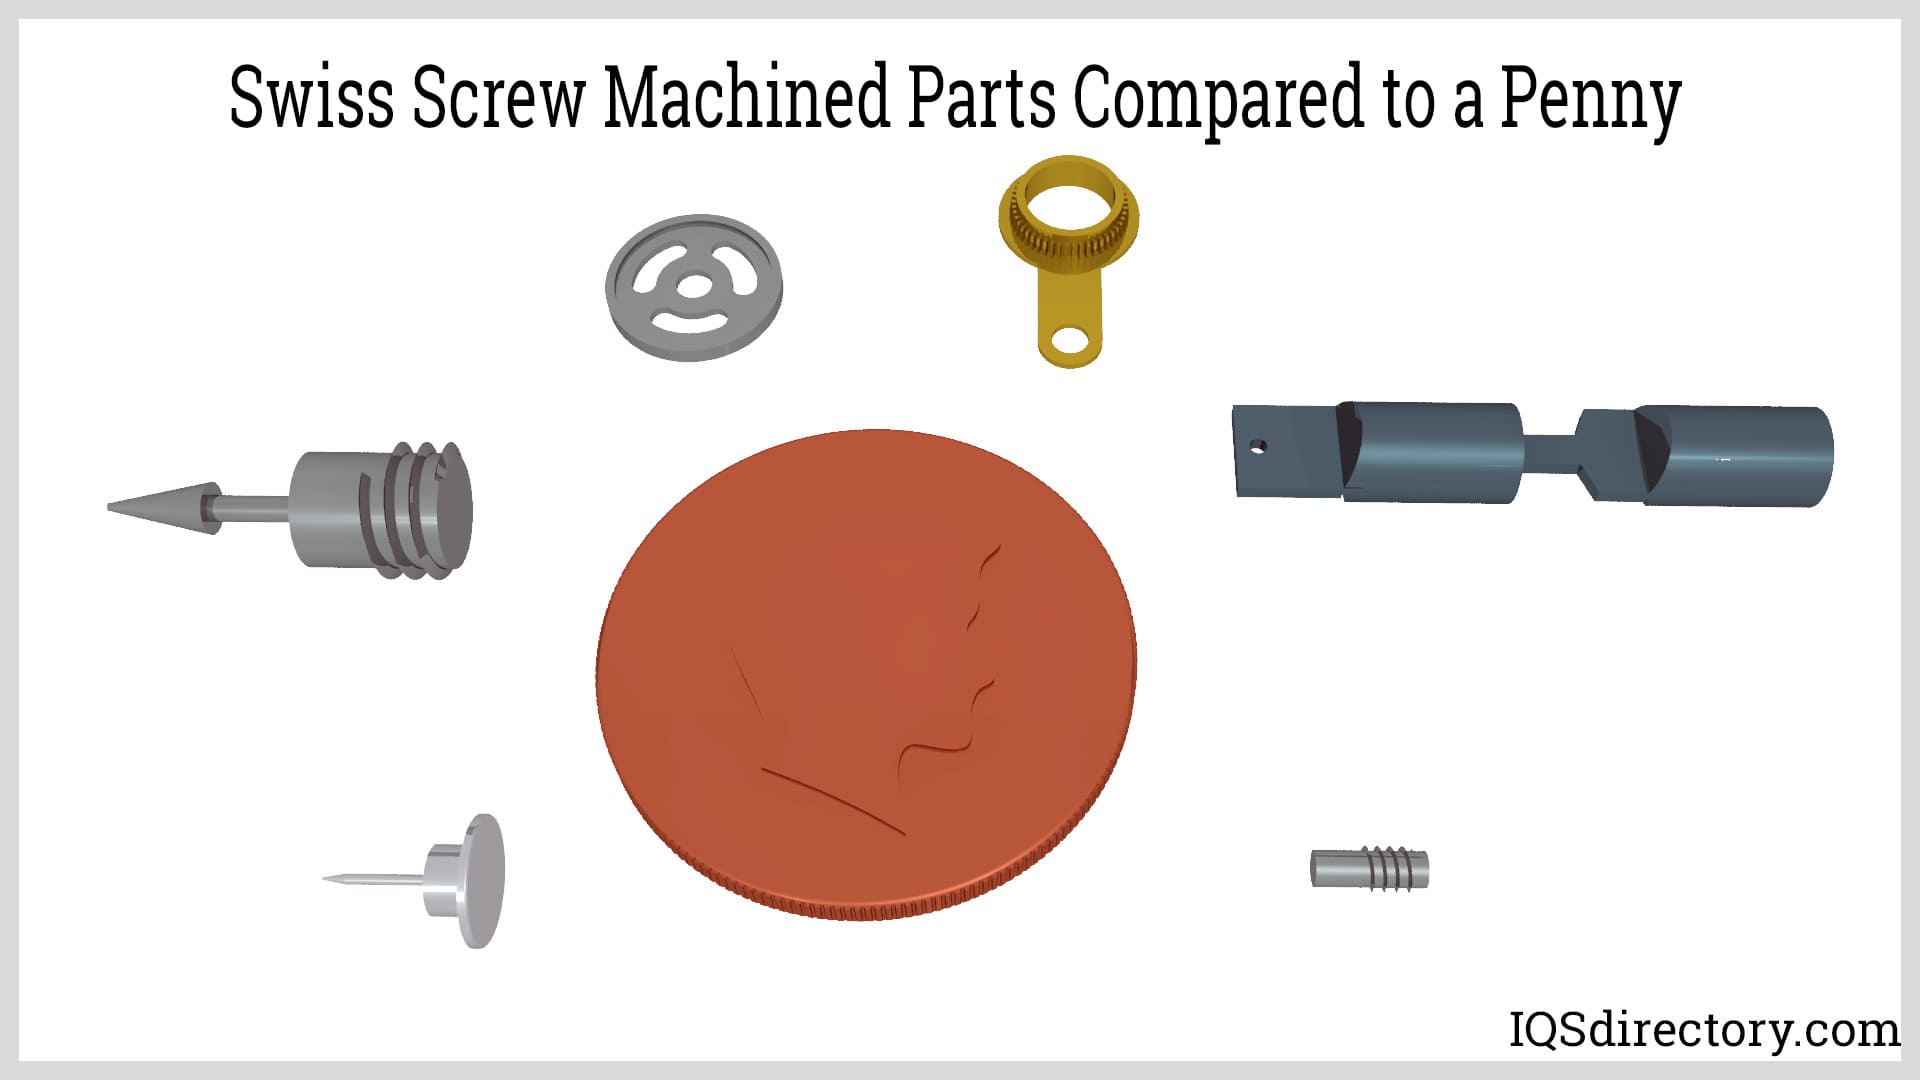 Swiss Screw Machined Parts Compared to a Penny